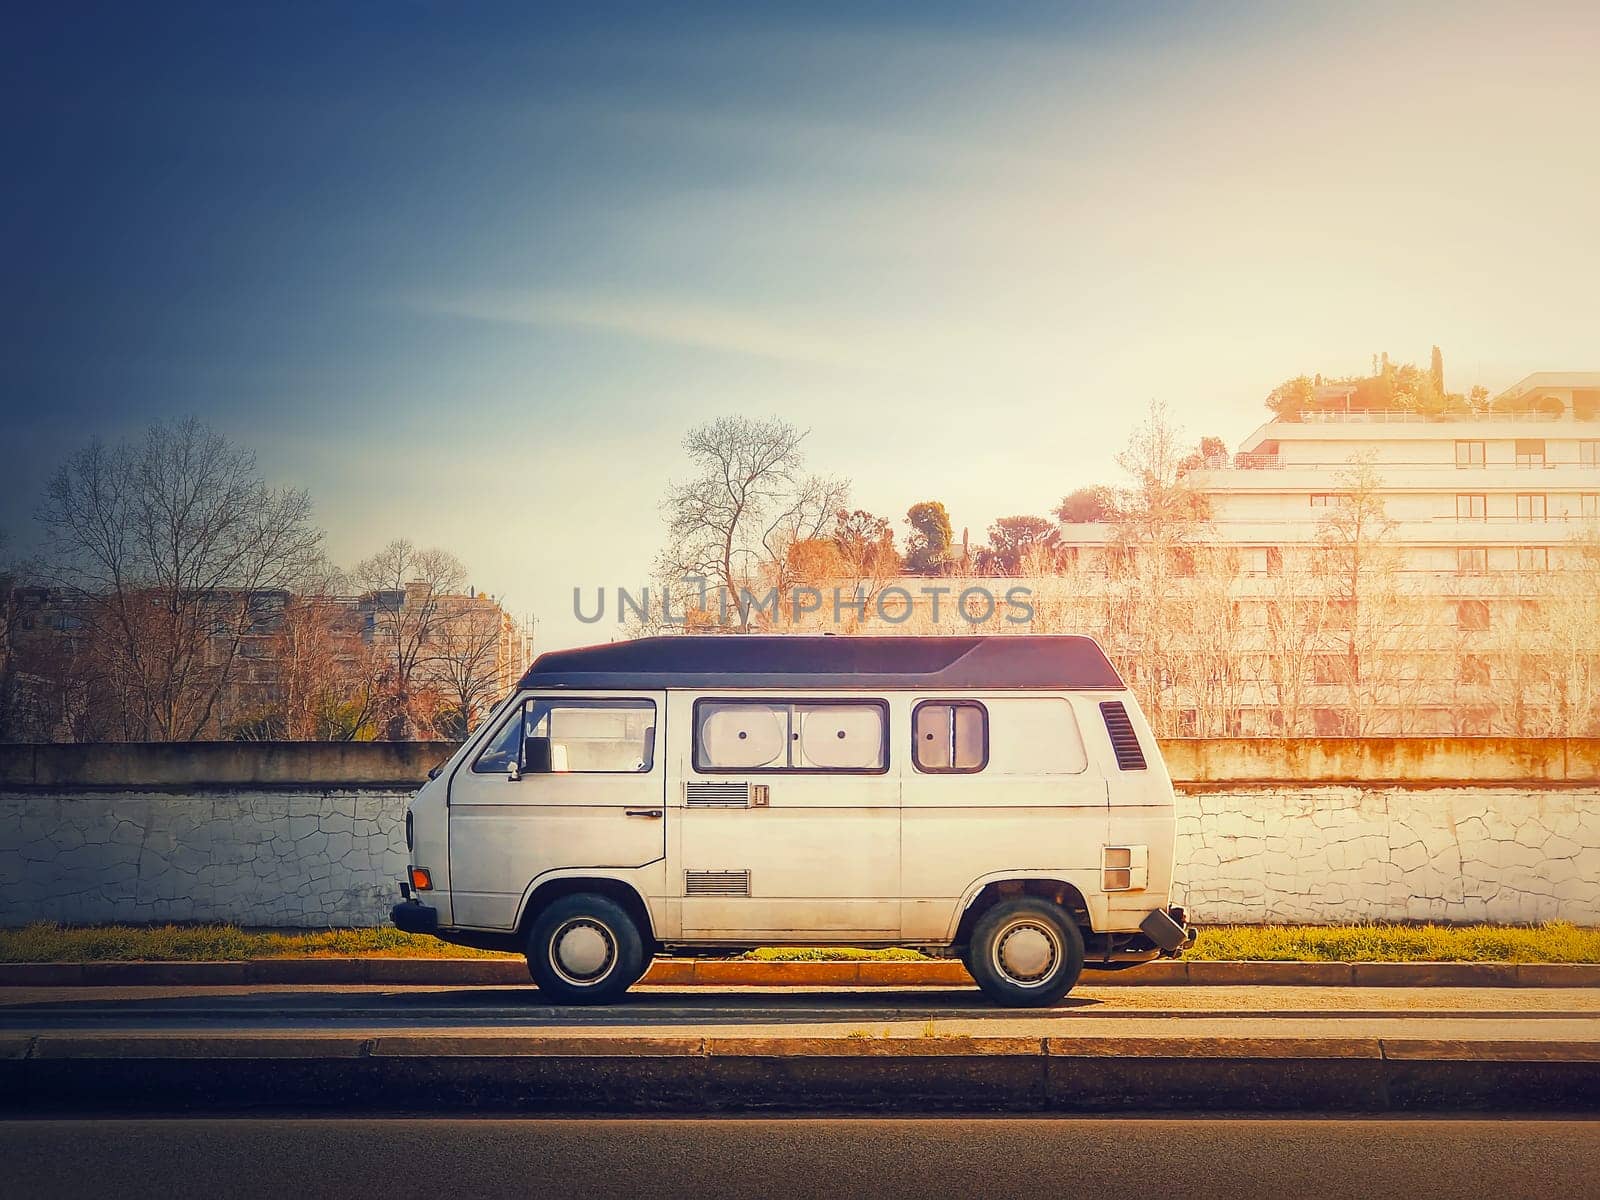 Old van parked on the edge of the street in the sunset sky background, Asnieres sur Seine, Paris suburb, France by psychoshadow